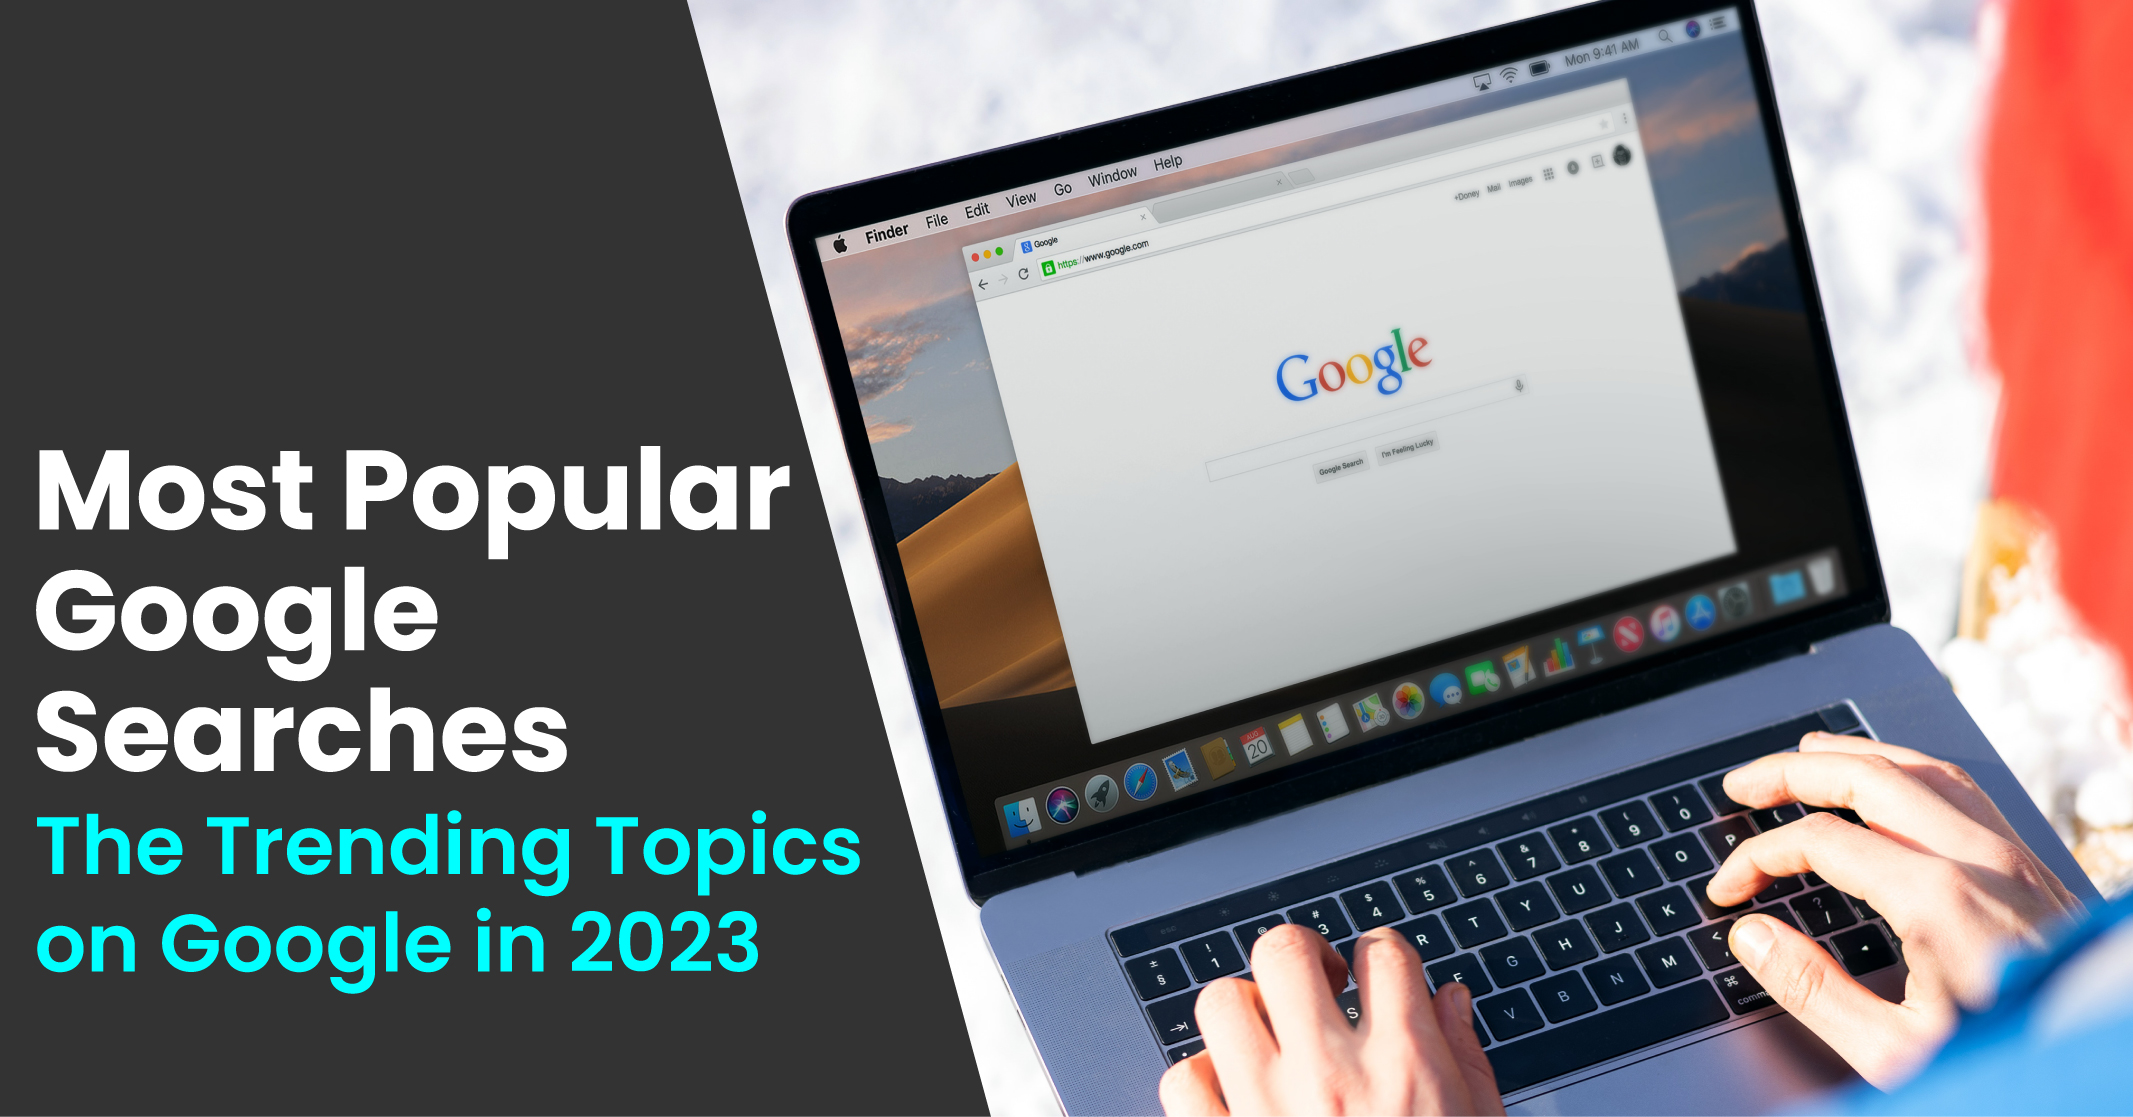 Most Popular Google Searches The Trending Topics on Google in 2023